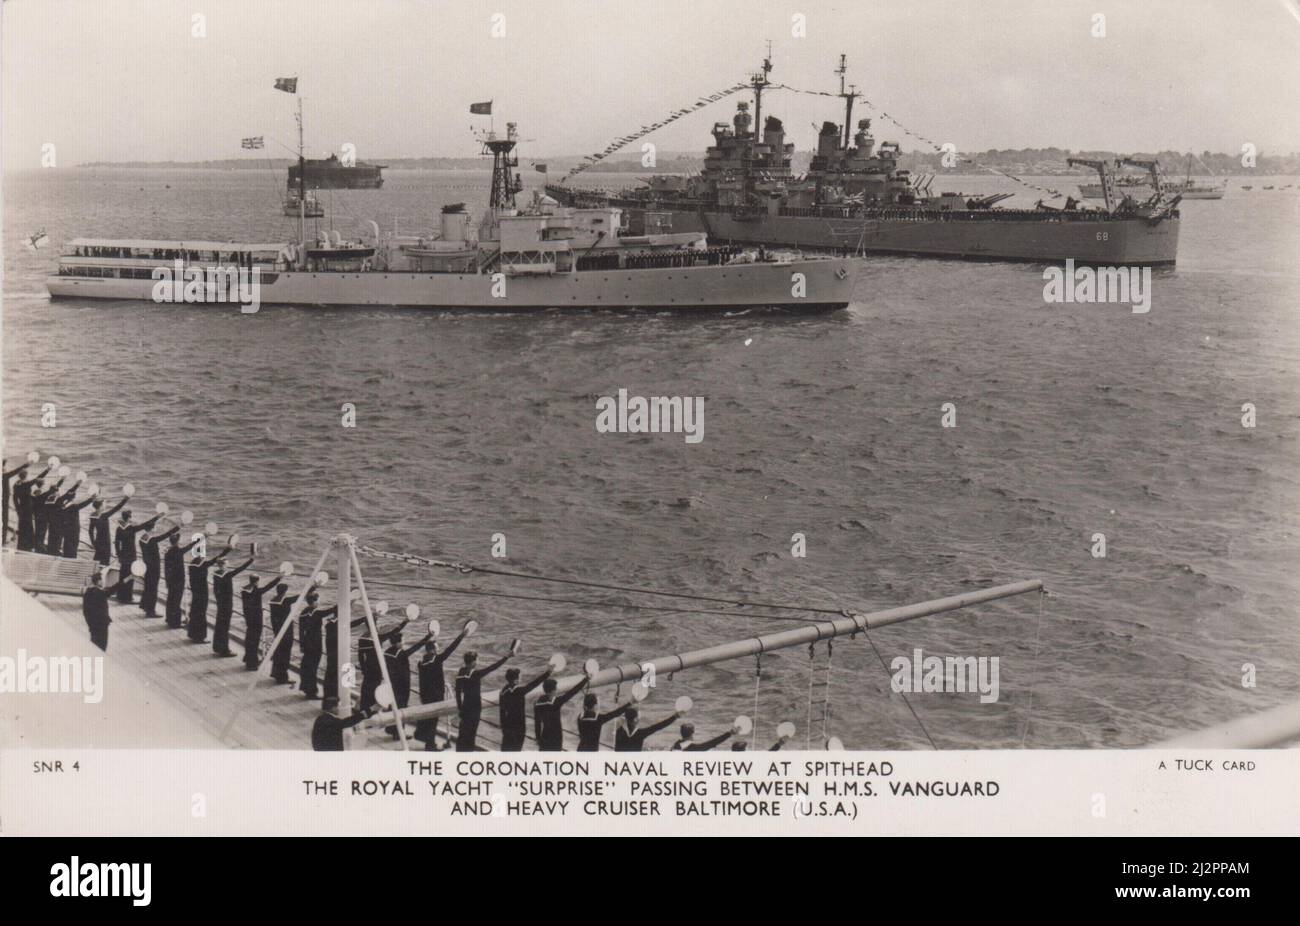 The Coronation Naval Review at Spithead, 1953: The Royal Yacht Surprise passing between HMS Vanguard and Heavy Cruiser Baltimore (USA) Stock Photo